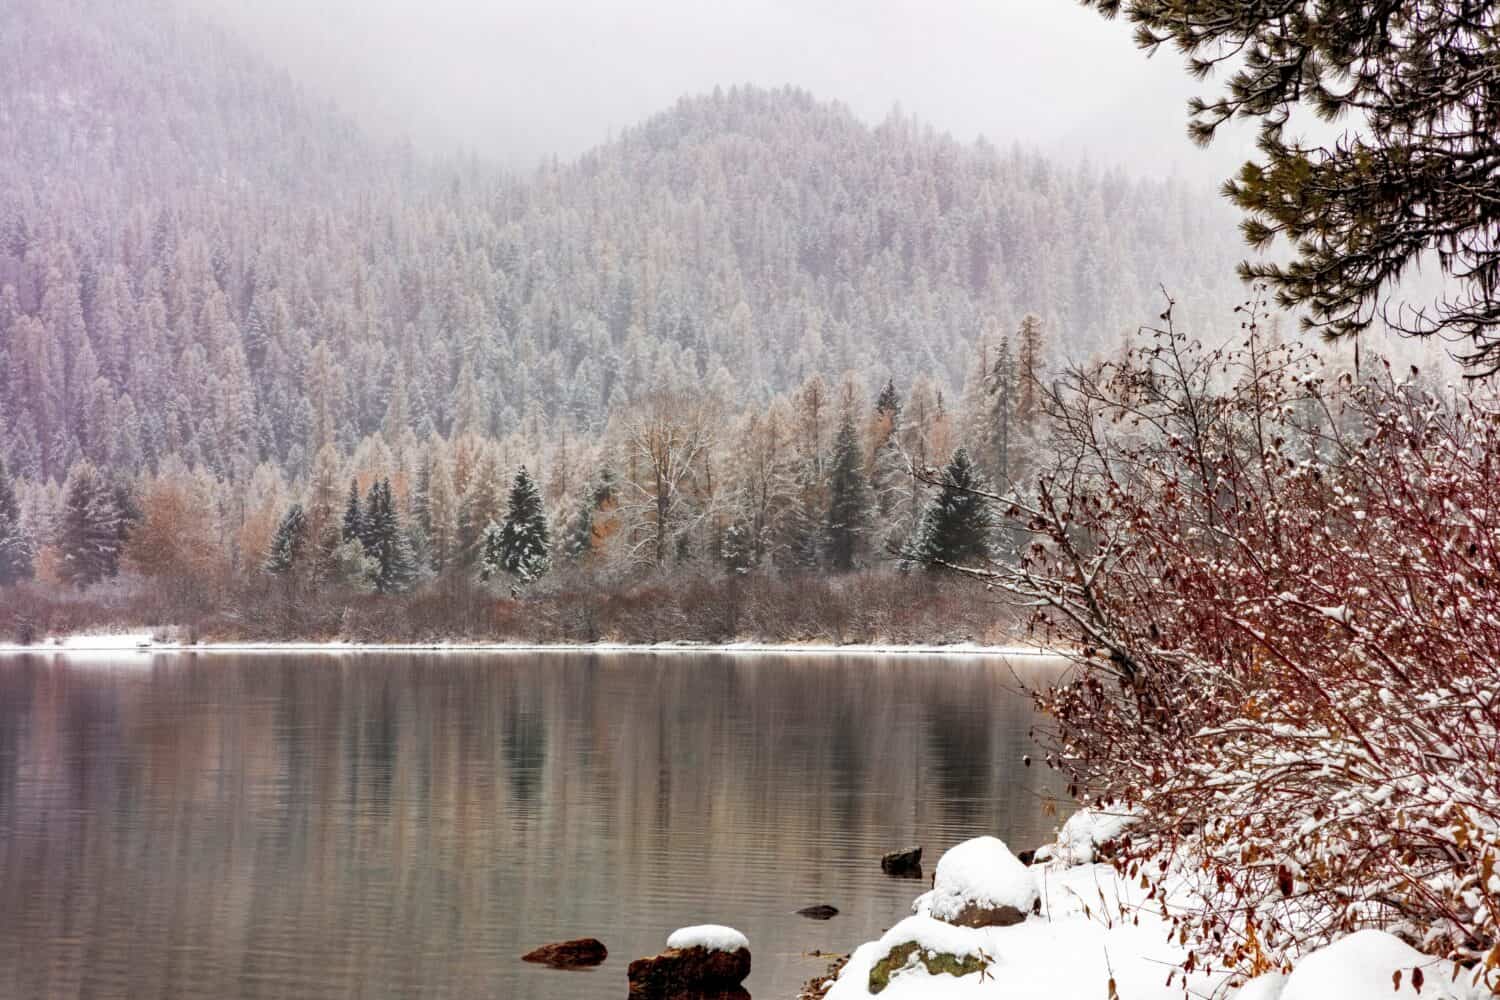 Snowy autumn day on Tally Lake in the Flathead National Forest, Montana, USA